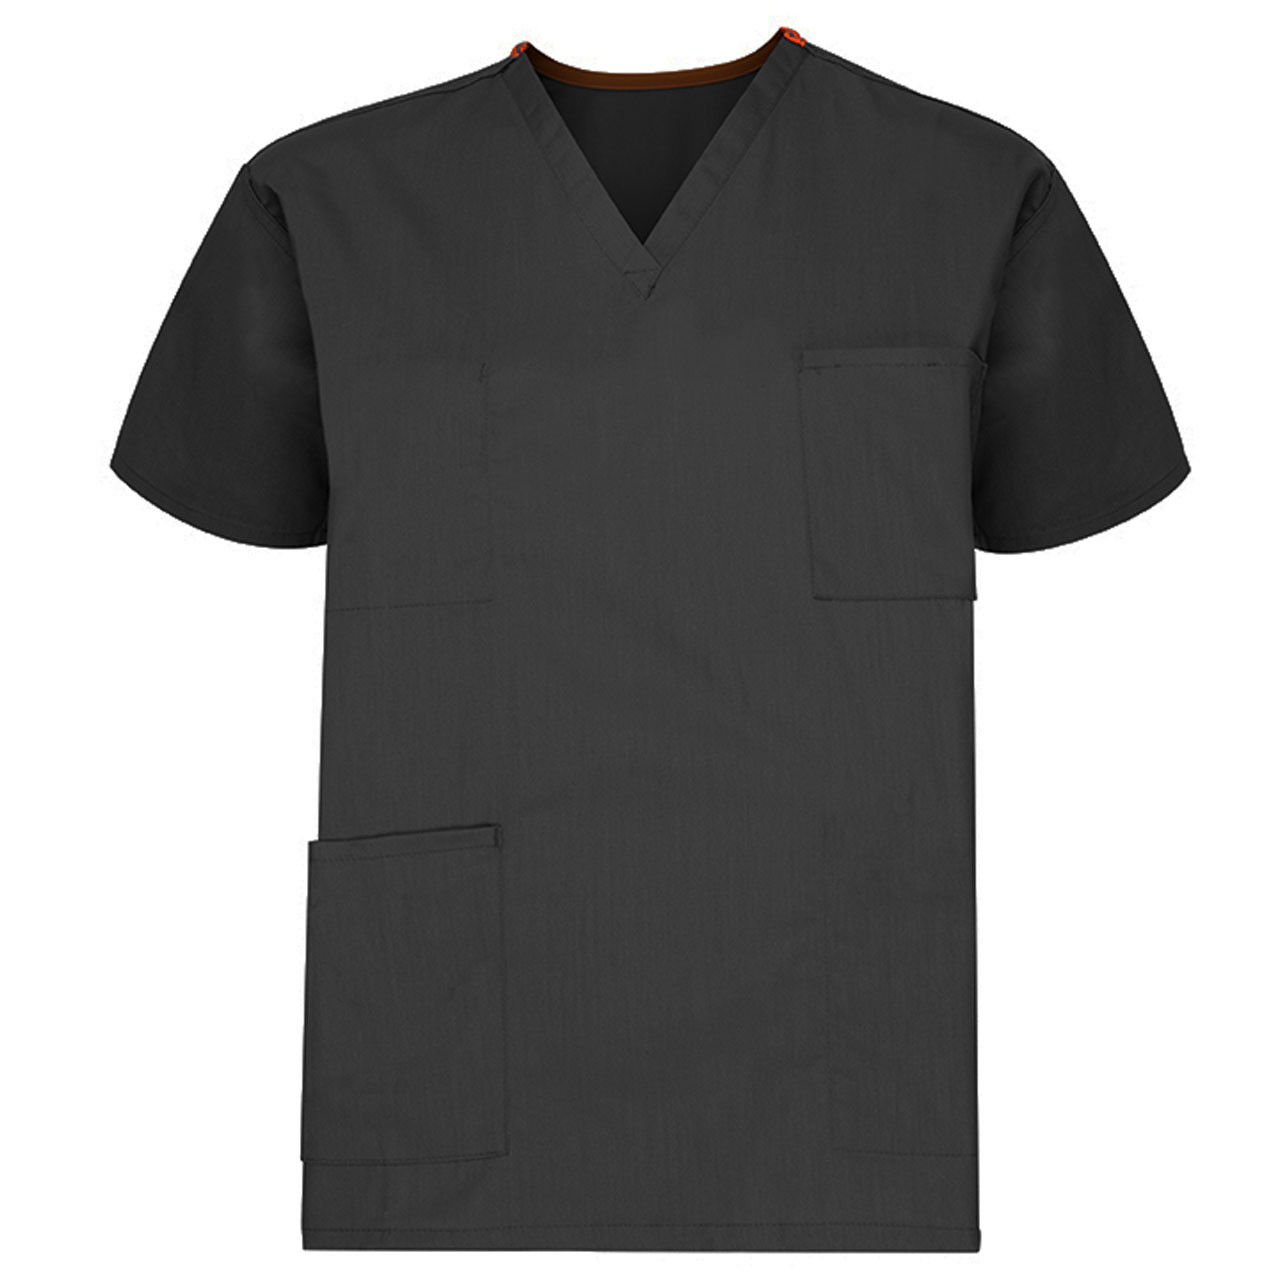 Unisex Reversible Scrub Top, Black - Case of 24 Questions & Answers